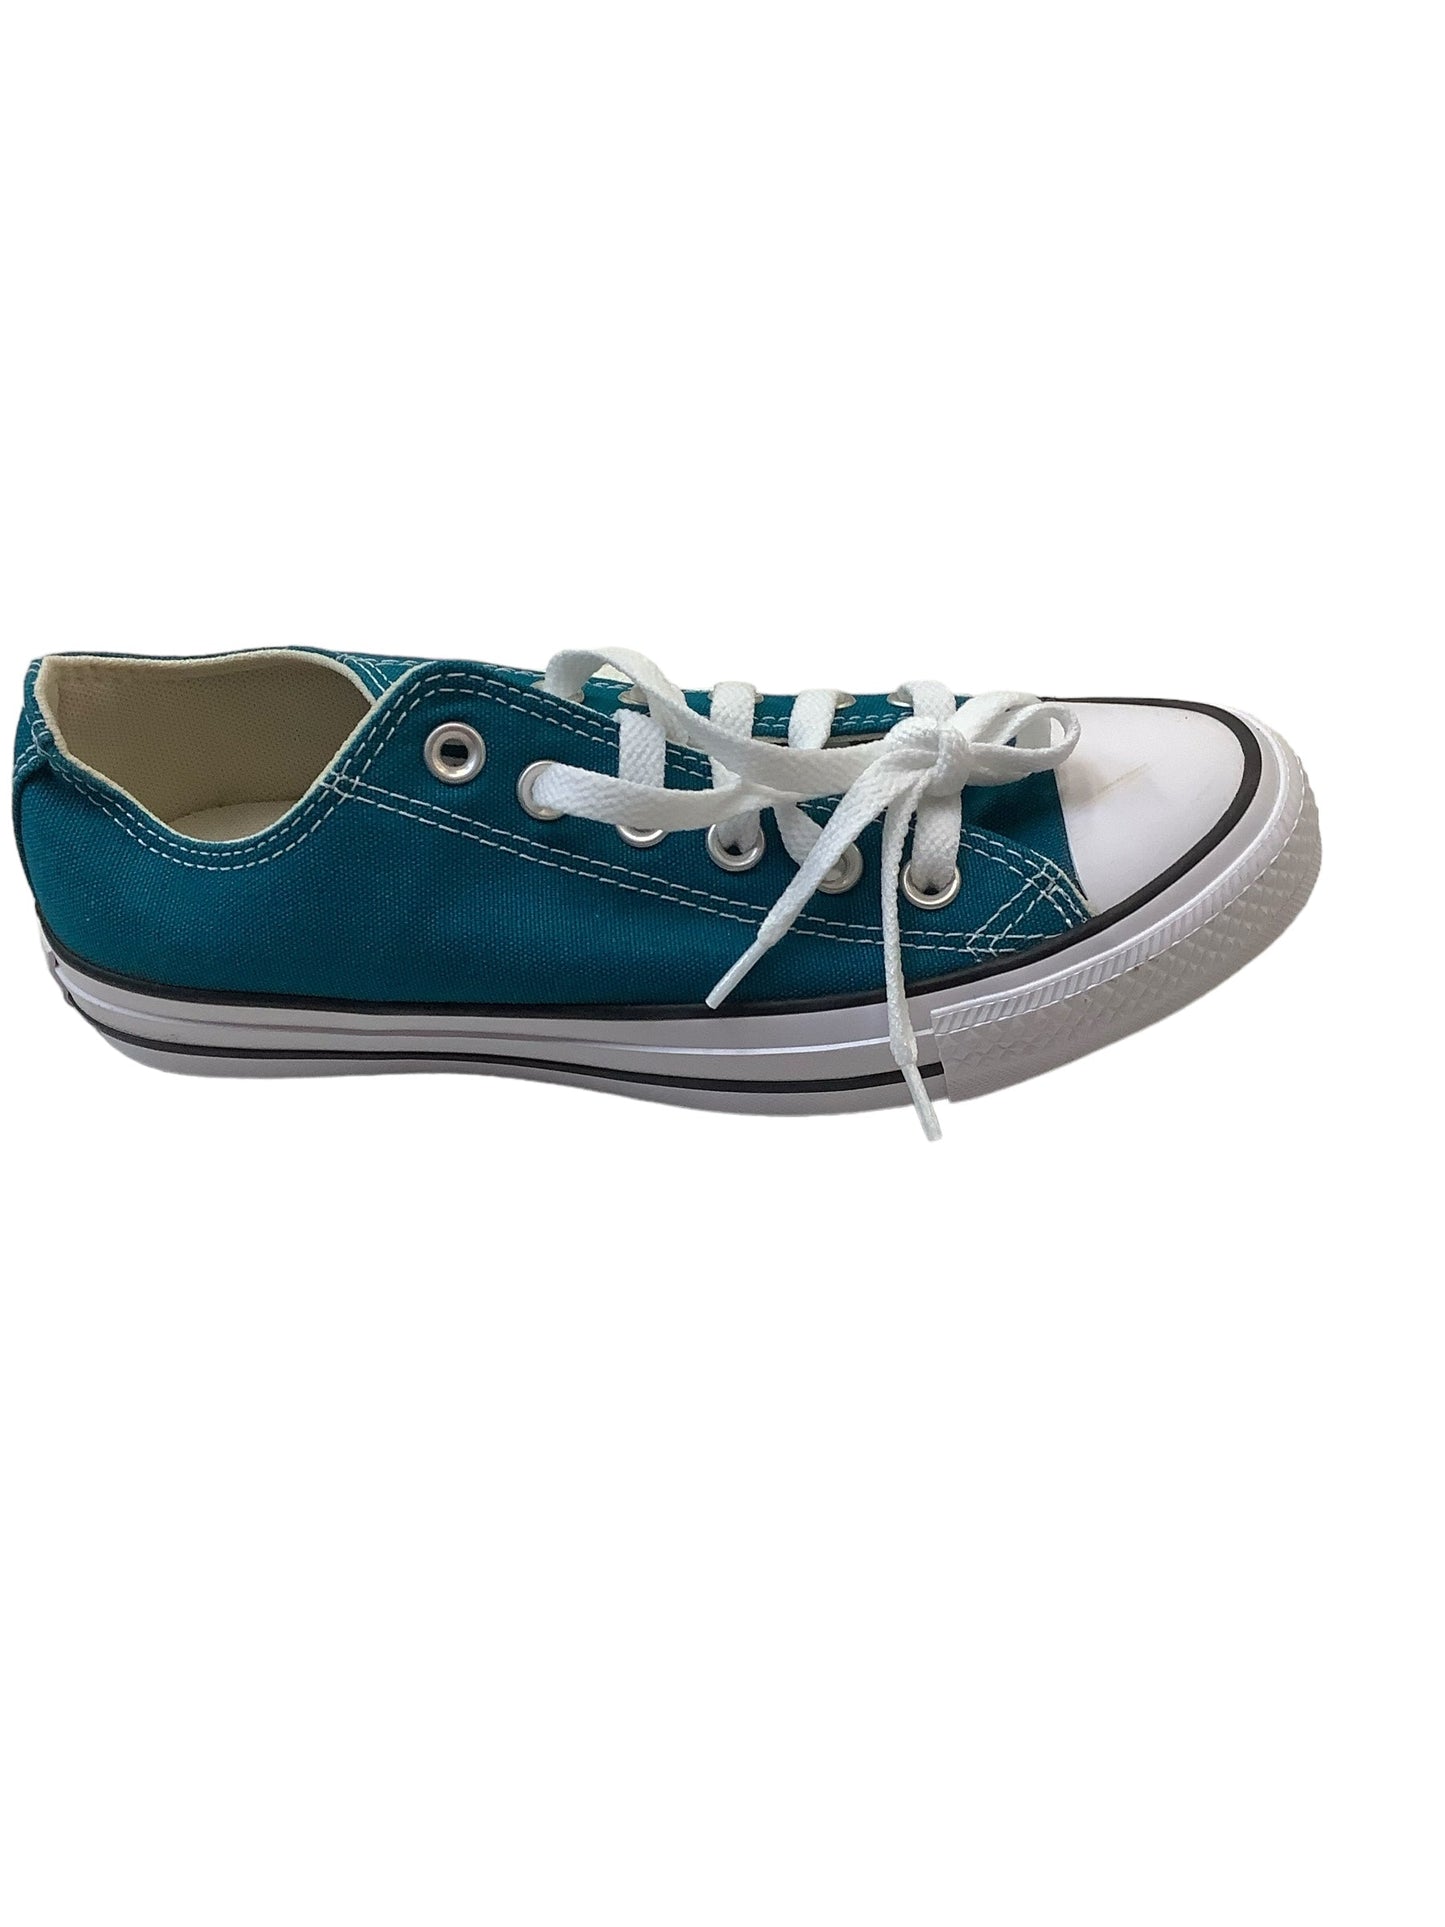 Teal Shoes Sneakers Converse, Size 7